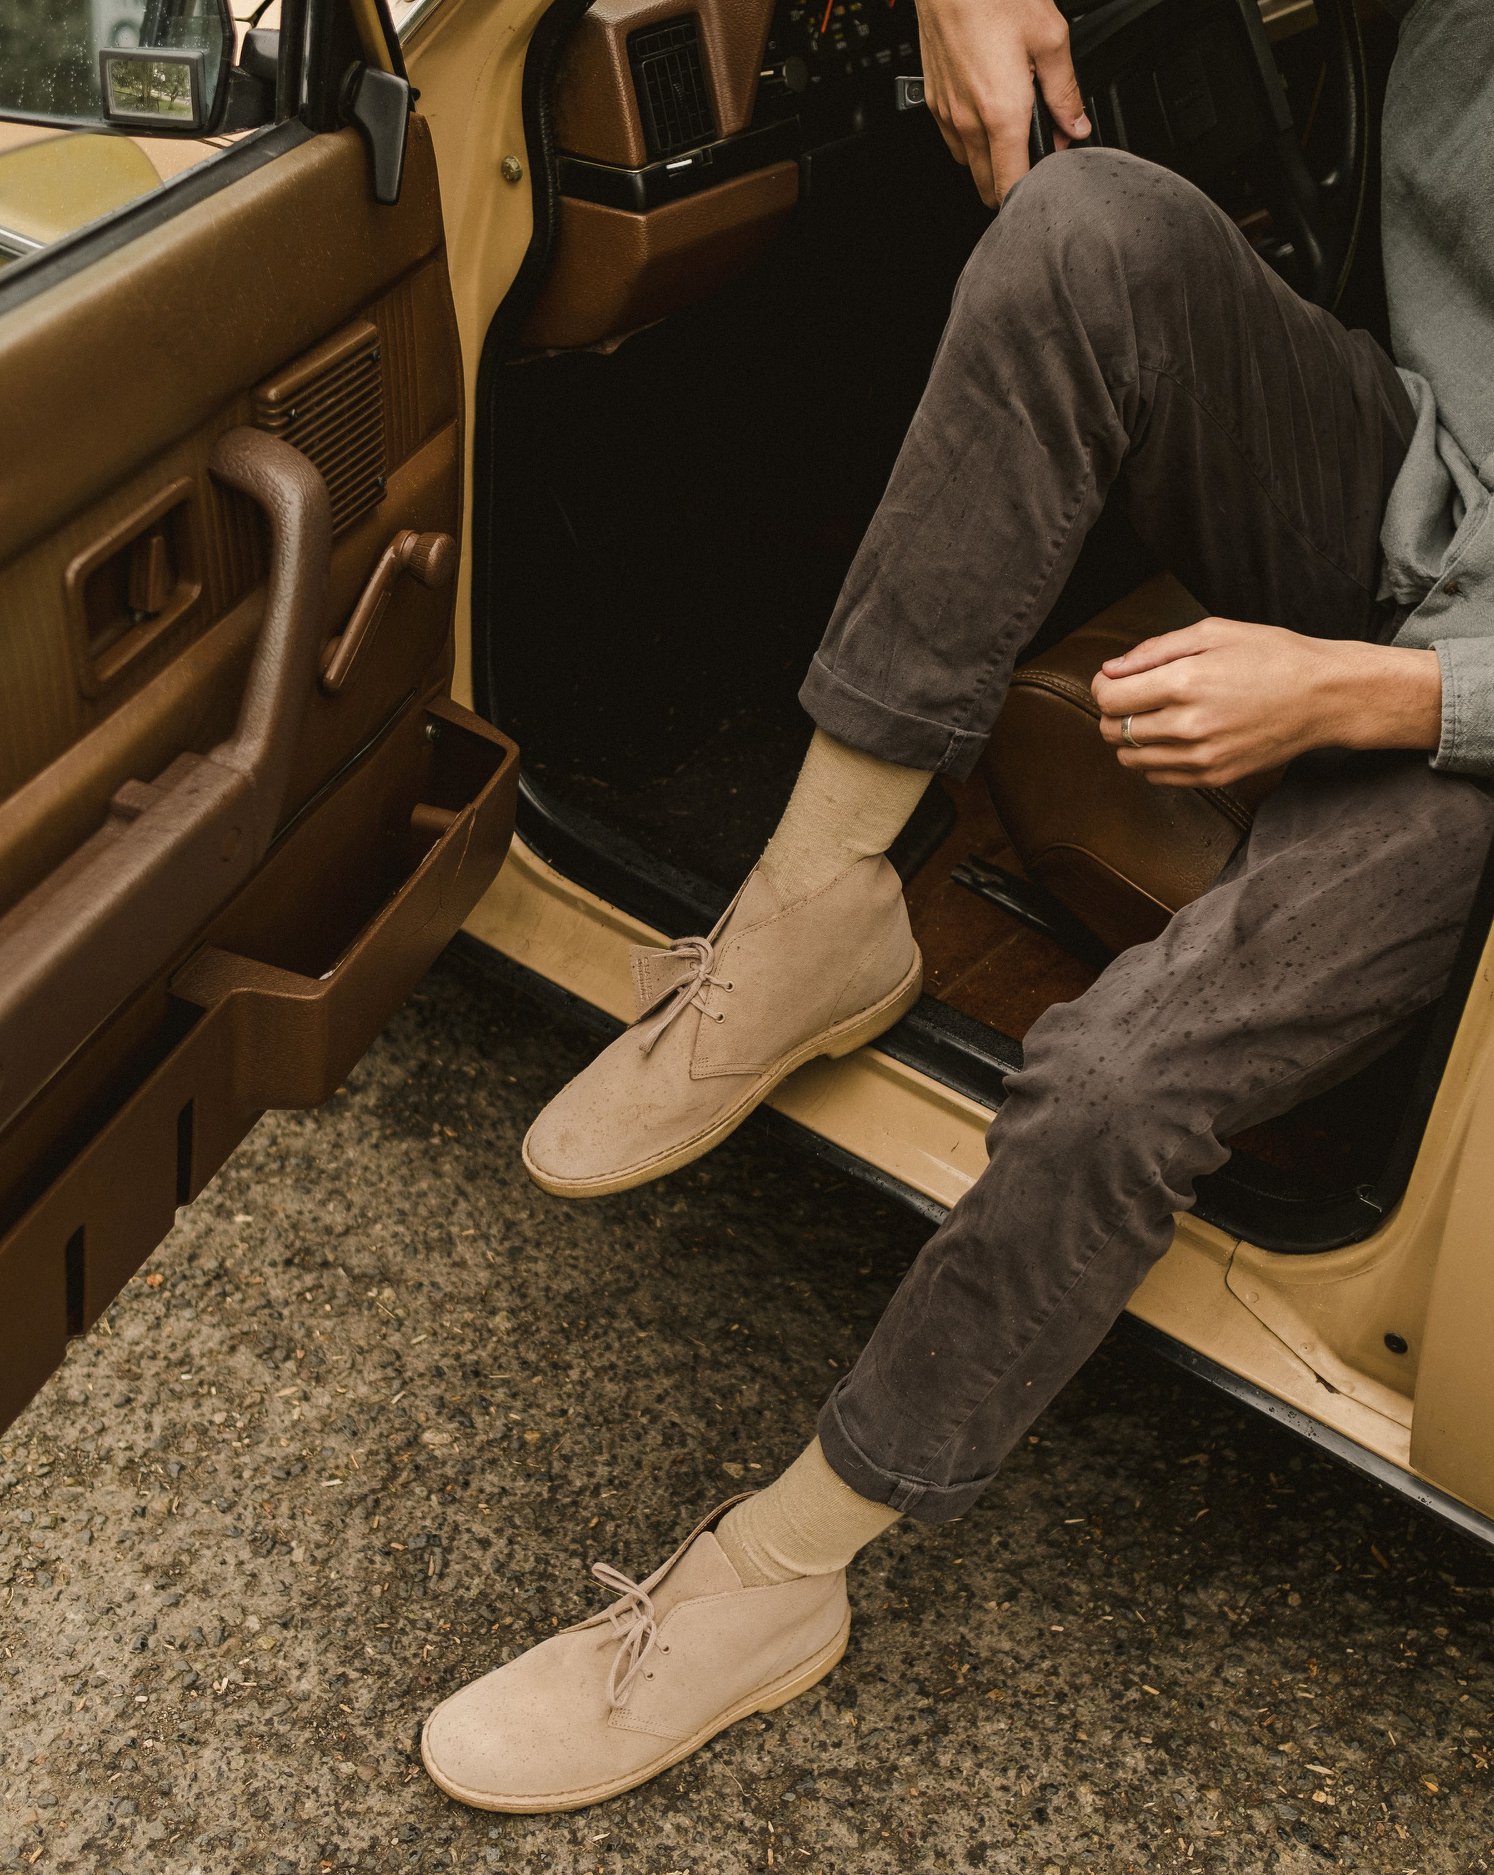 sand suede chukka boots